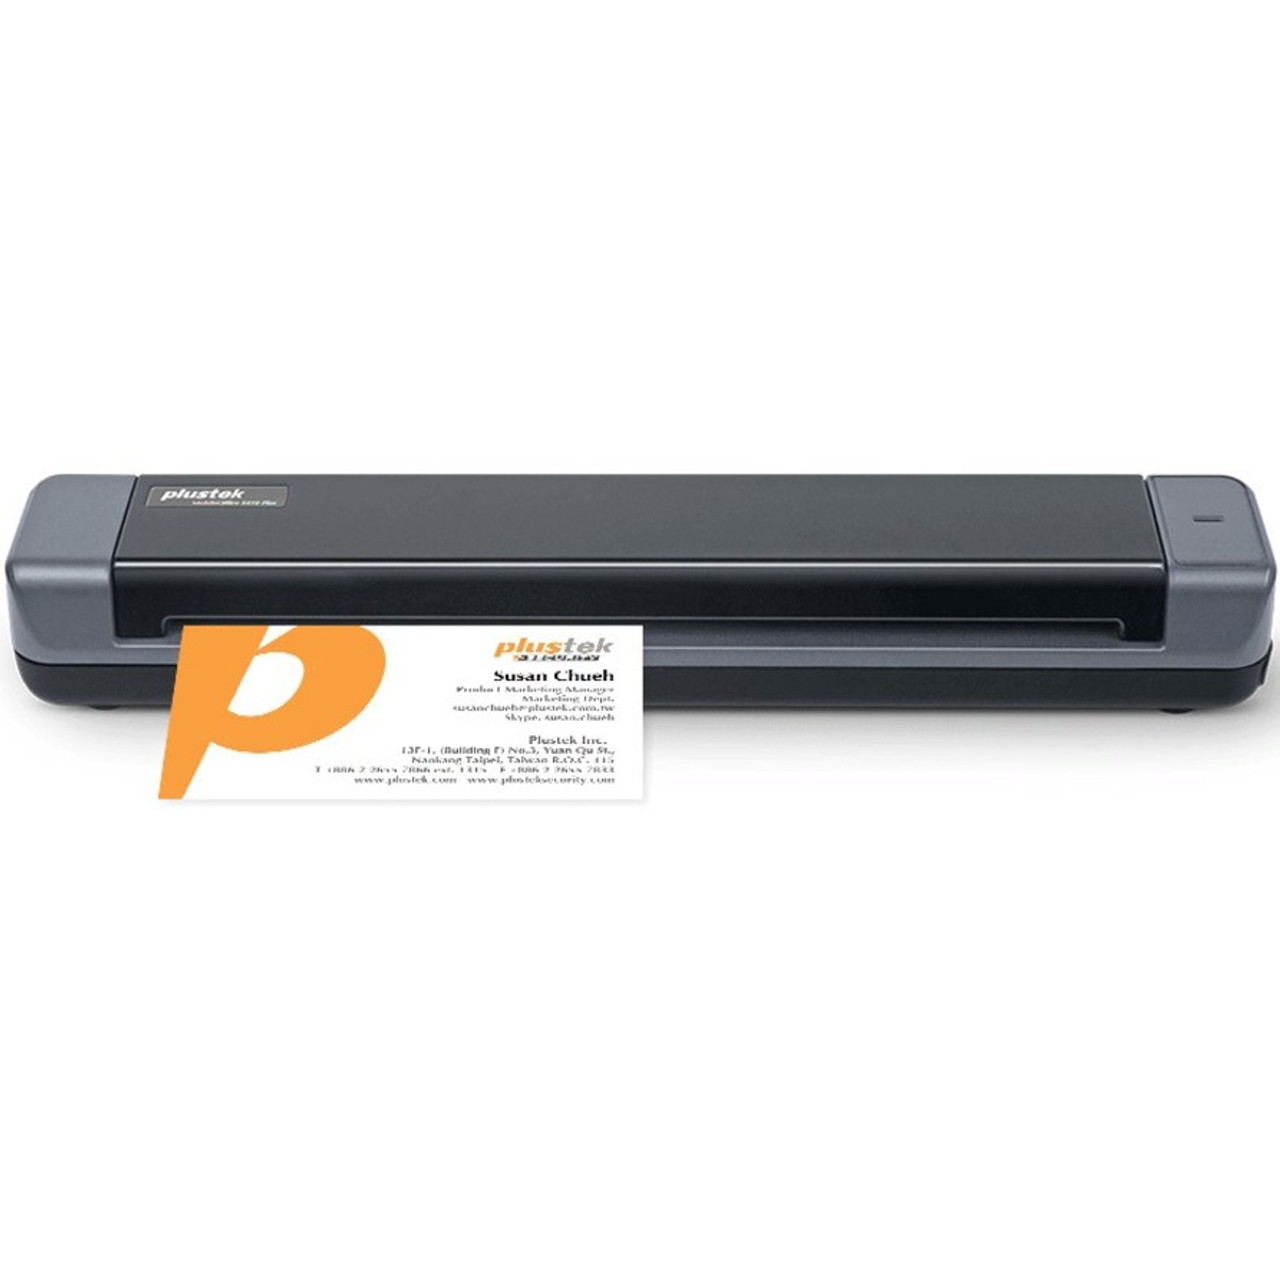 Plustek Mobile Scanner S410 Plus - Portable Sheet-Fed Document Scanner -  for Windows 7/8 / 10/11, Featuring Button-Free Scanning with Included OCR